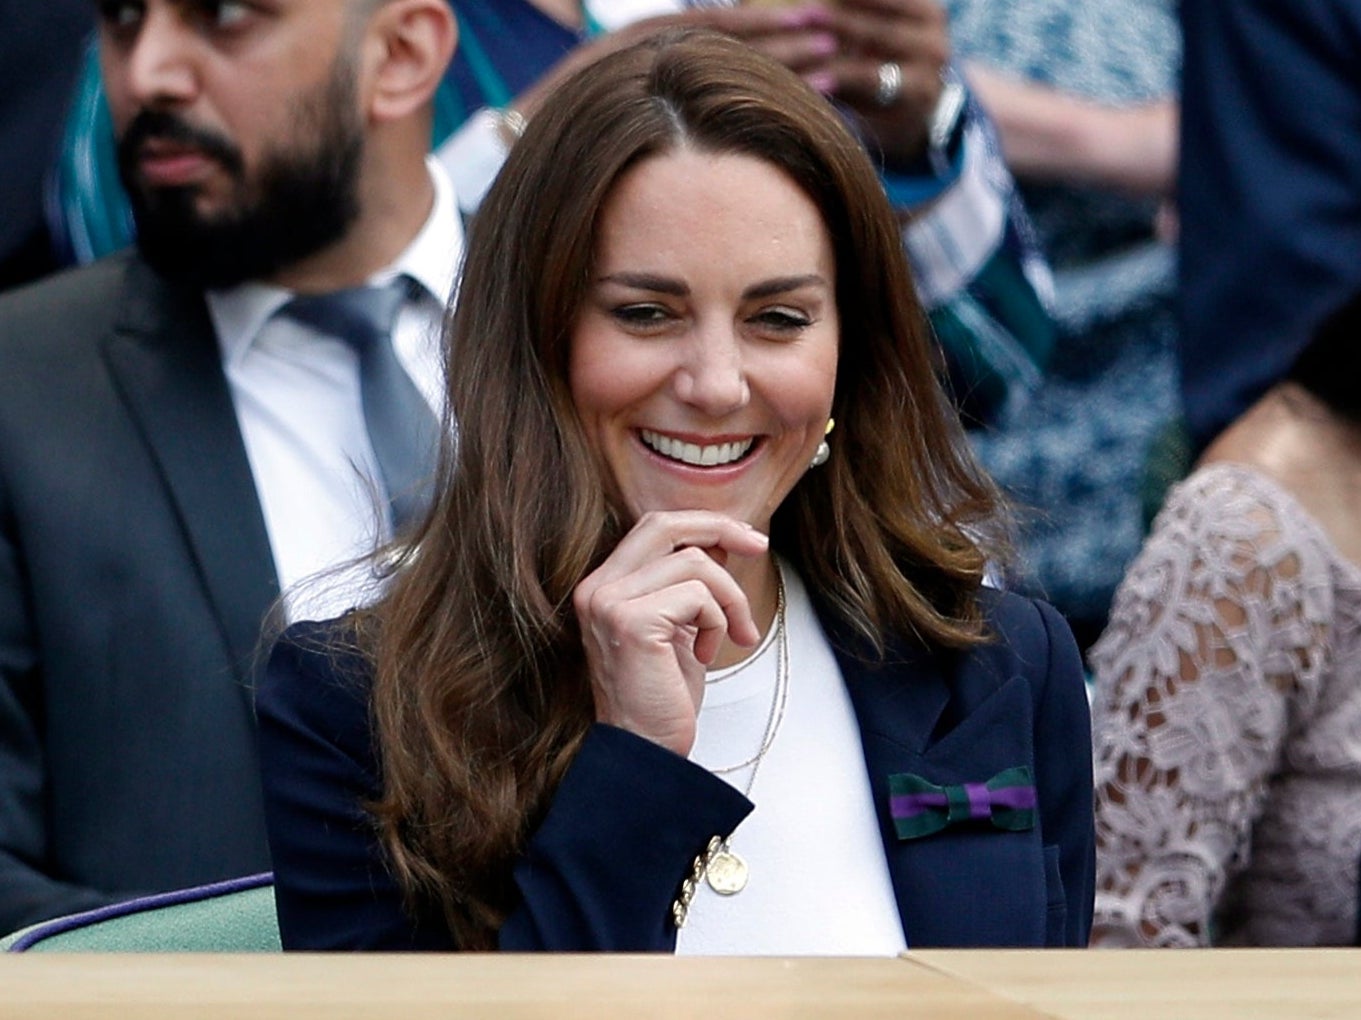 Wimbledon officials remain hopeful that Kate Middleton could make an appearance at this year’s tournament.